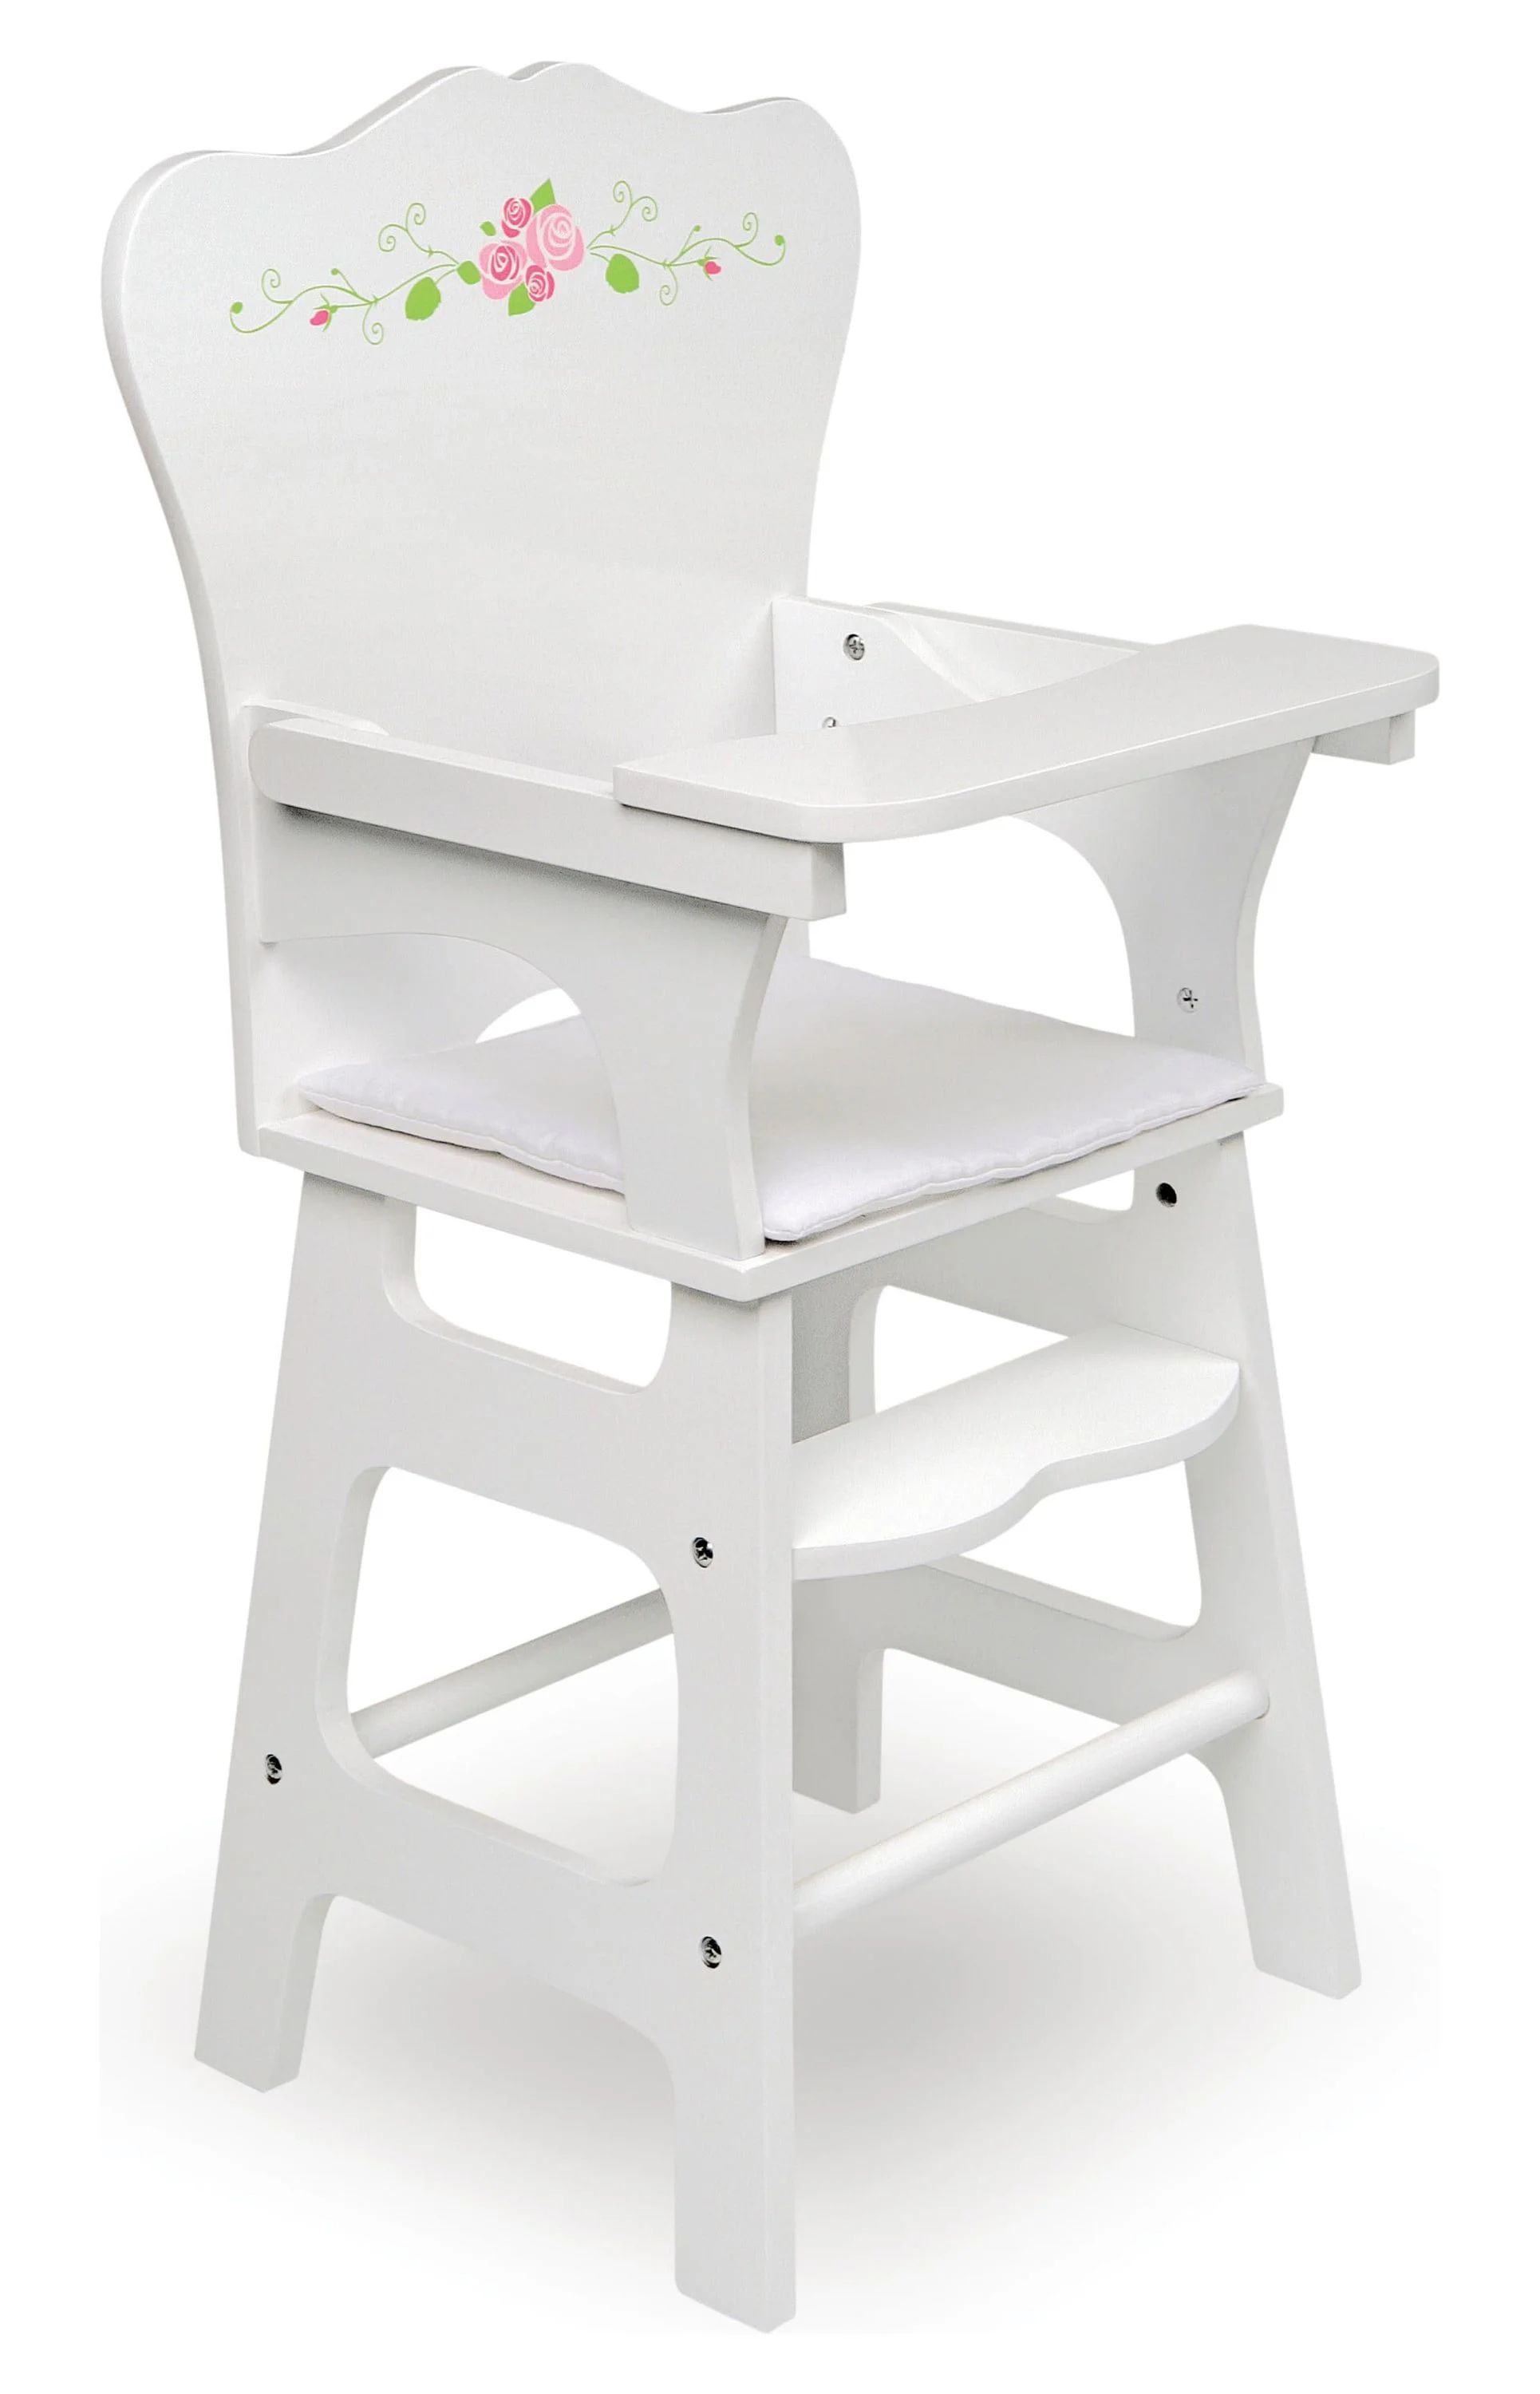 Badger Basket Doll High Chair with Padded Seat - White Rose | Walmart (US)